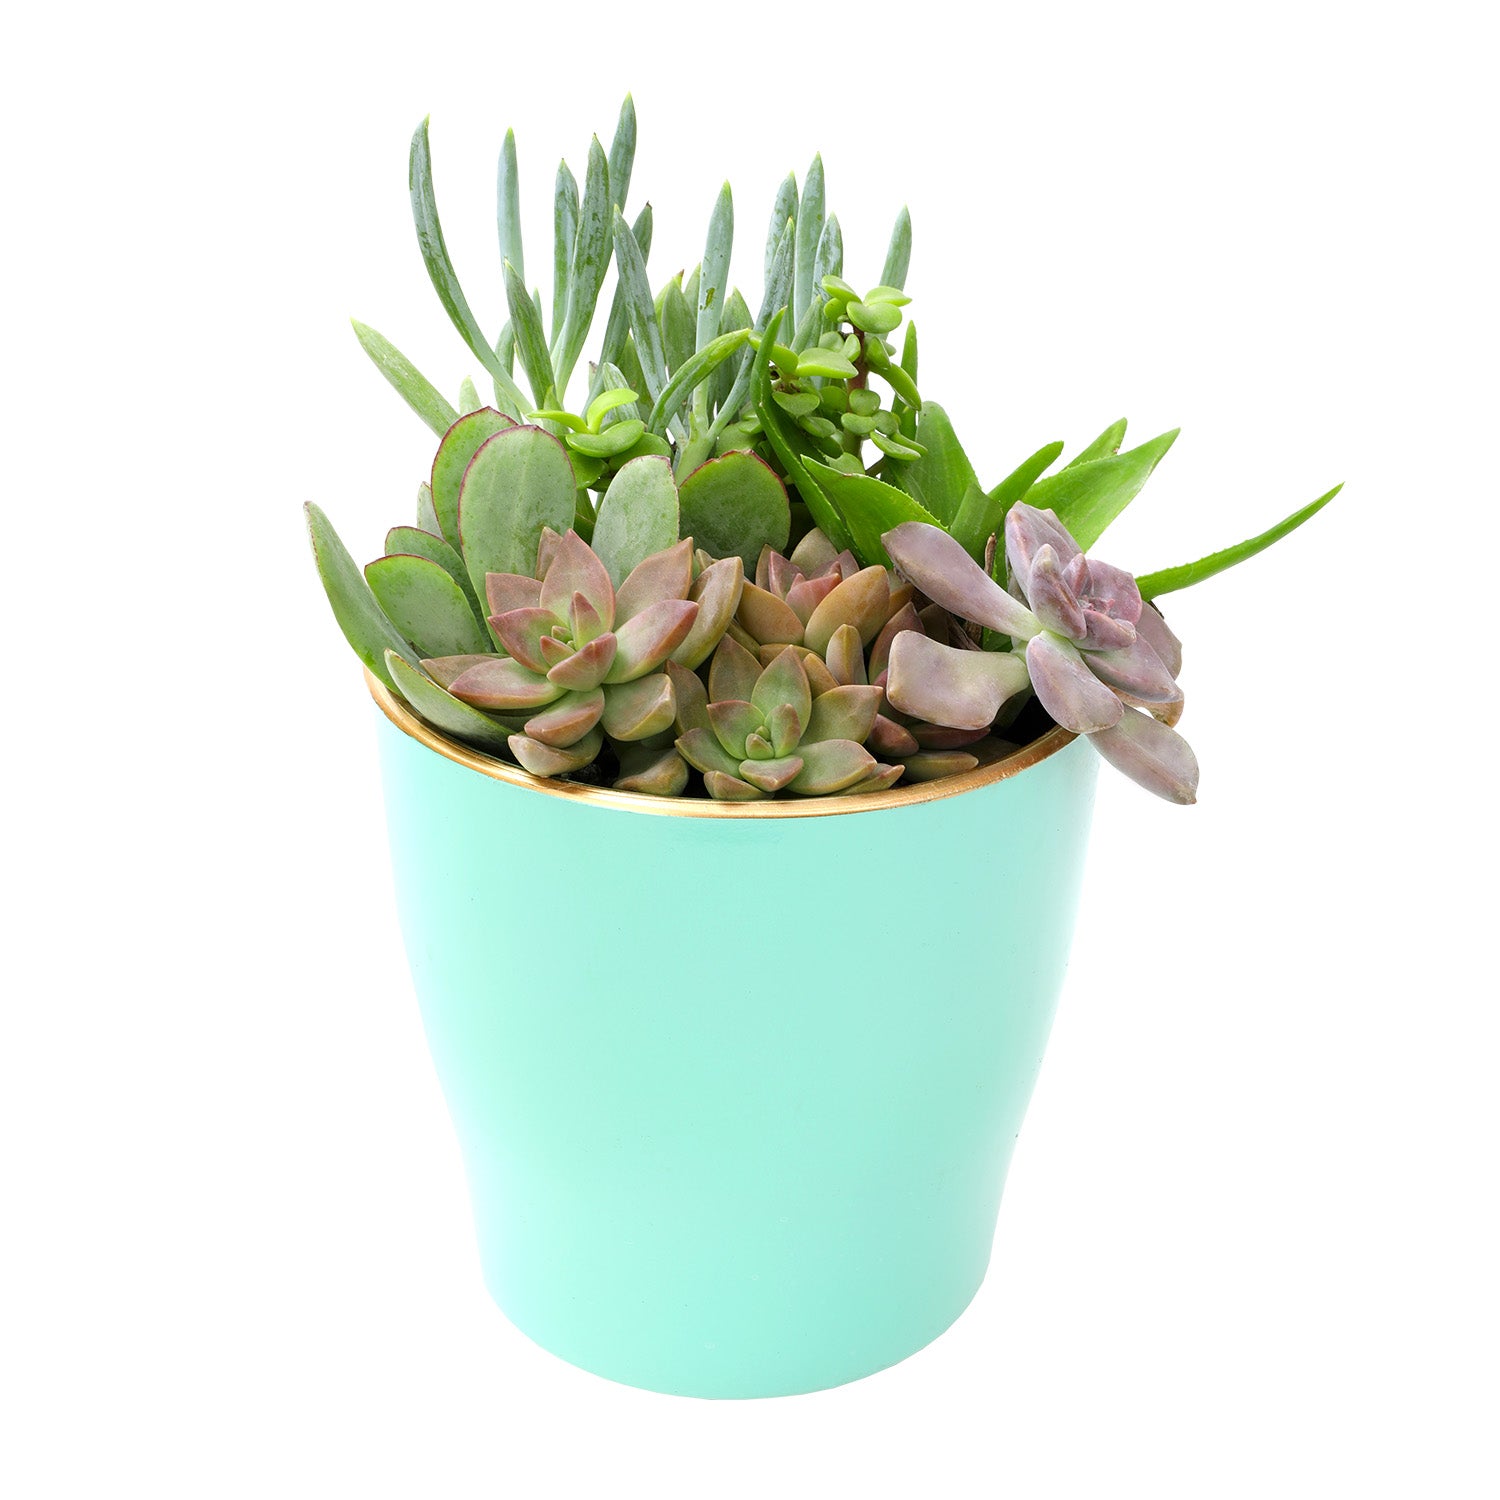 Element by Altman Plants 5IN Turquoise Clay Live Succulent Garden